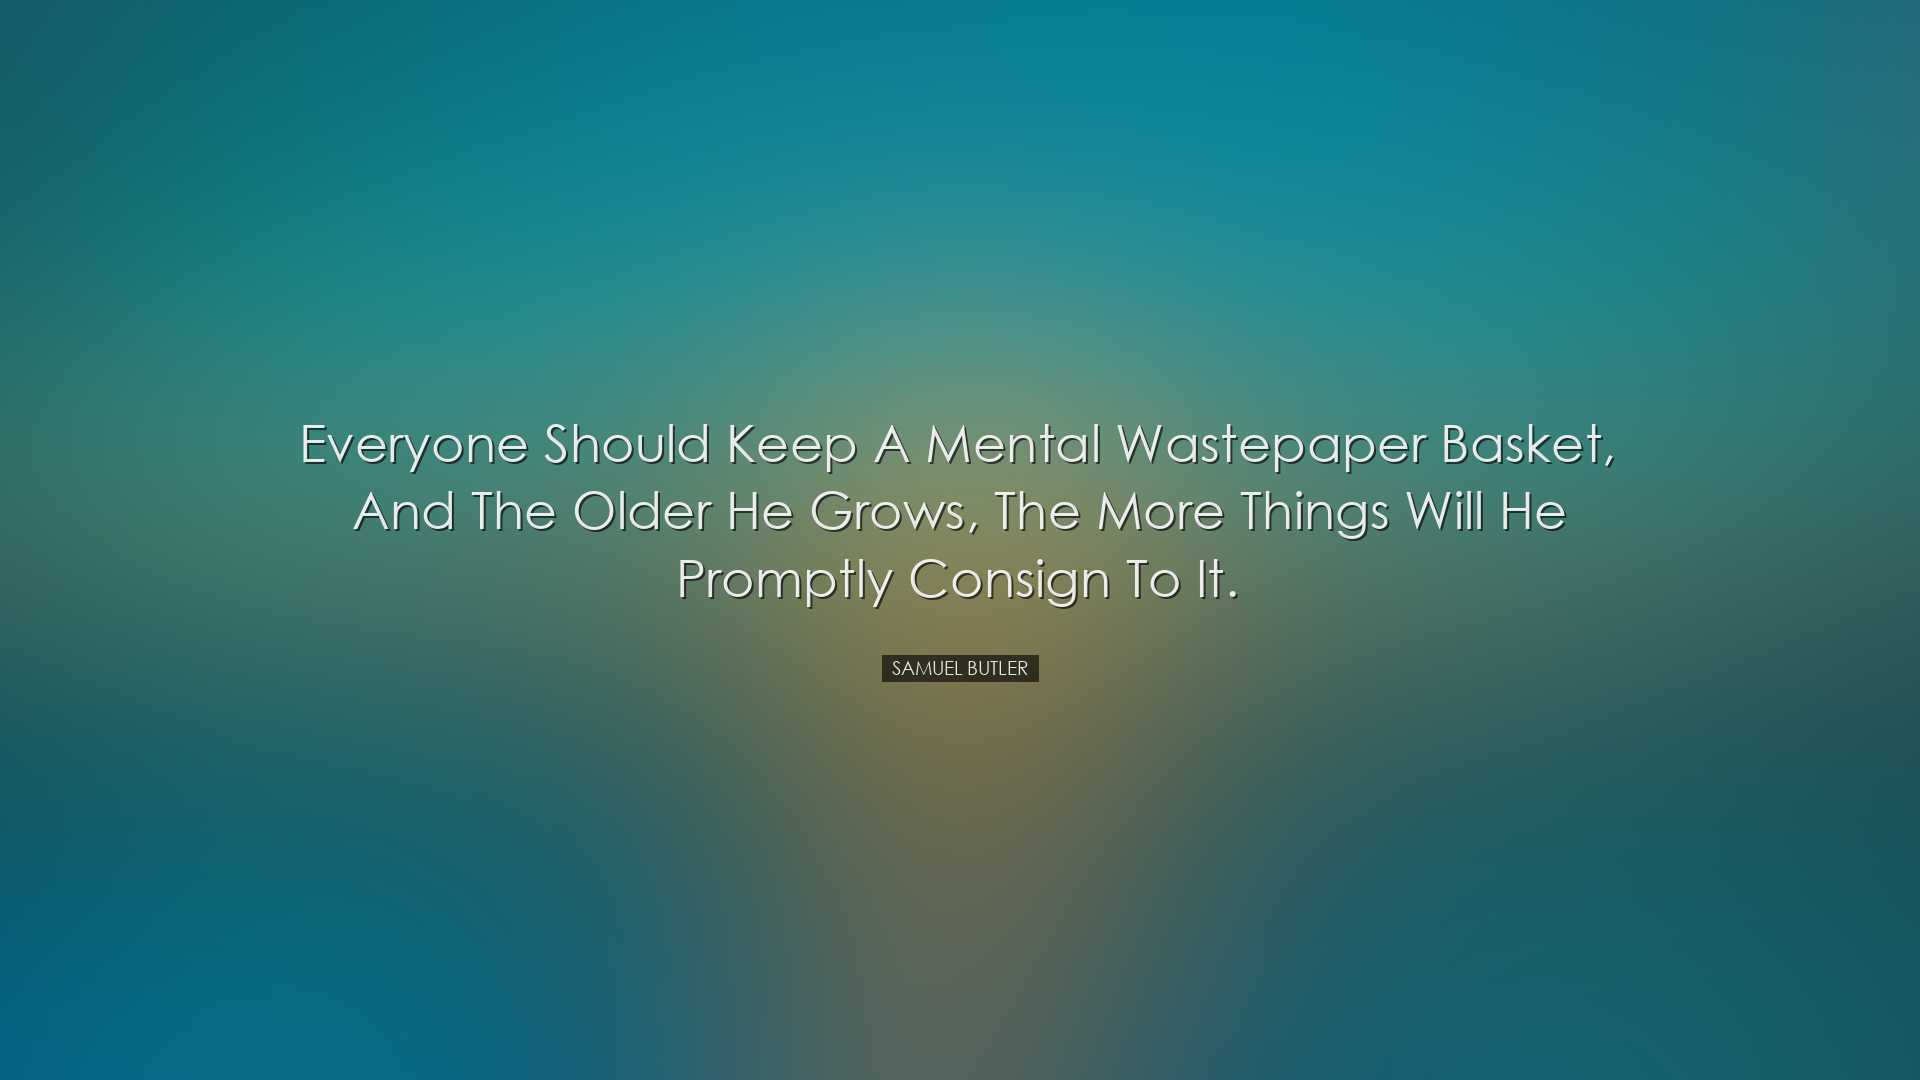 Everyone should keep a mental wastepaper basket, and the older he